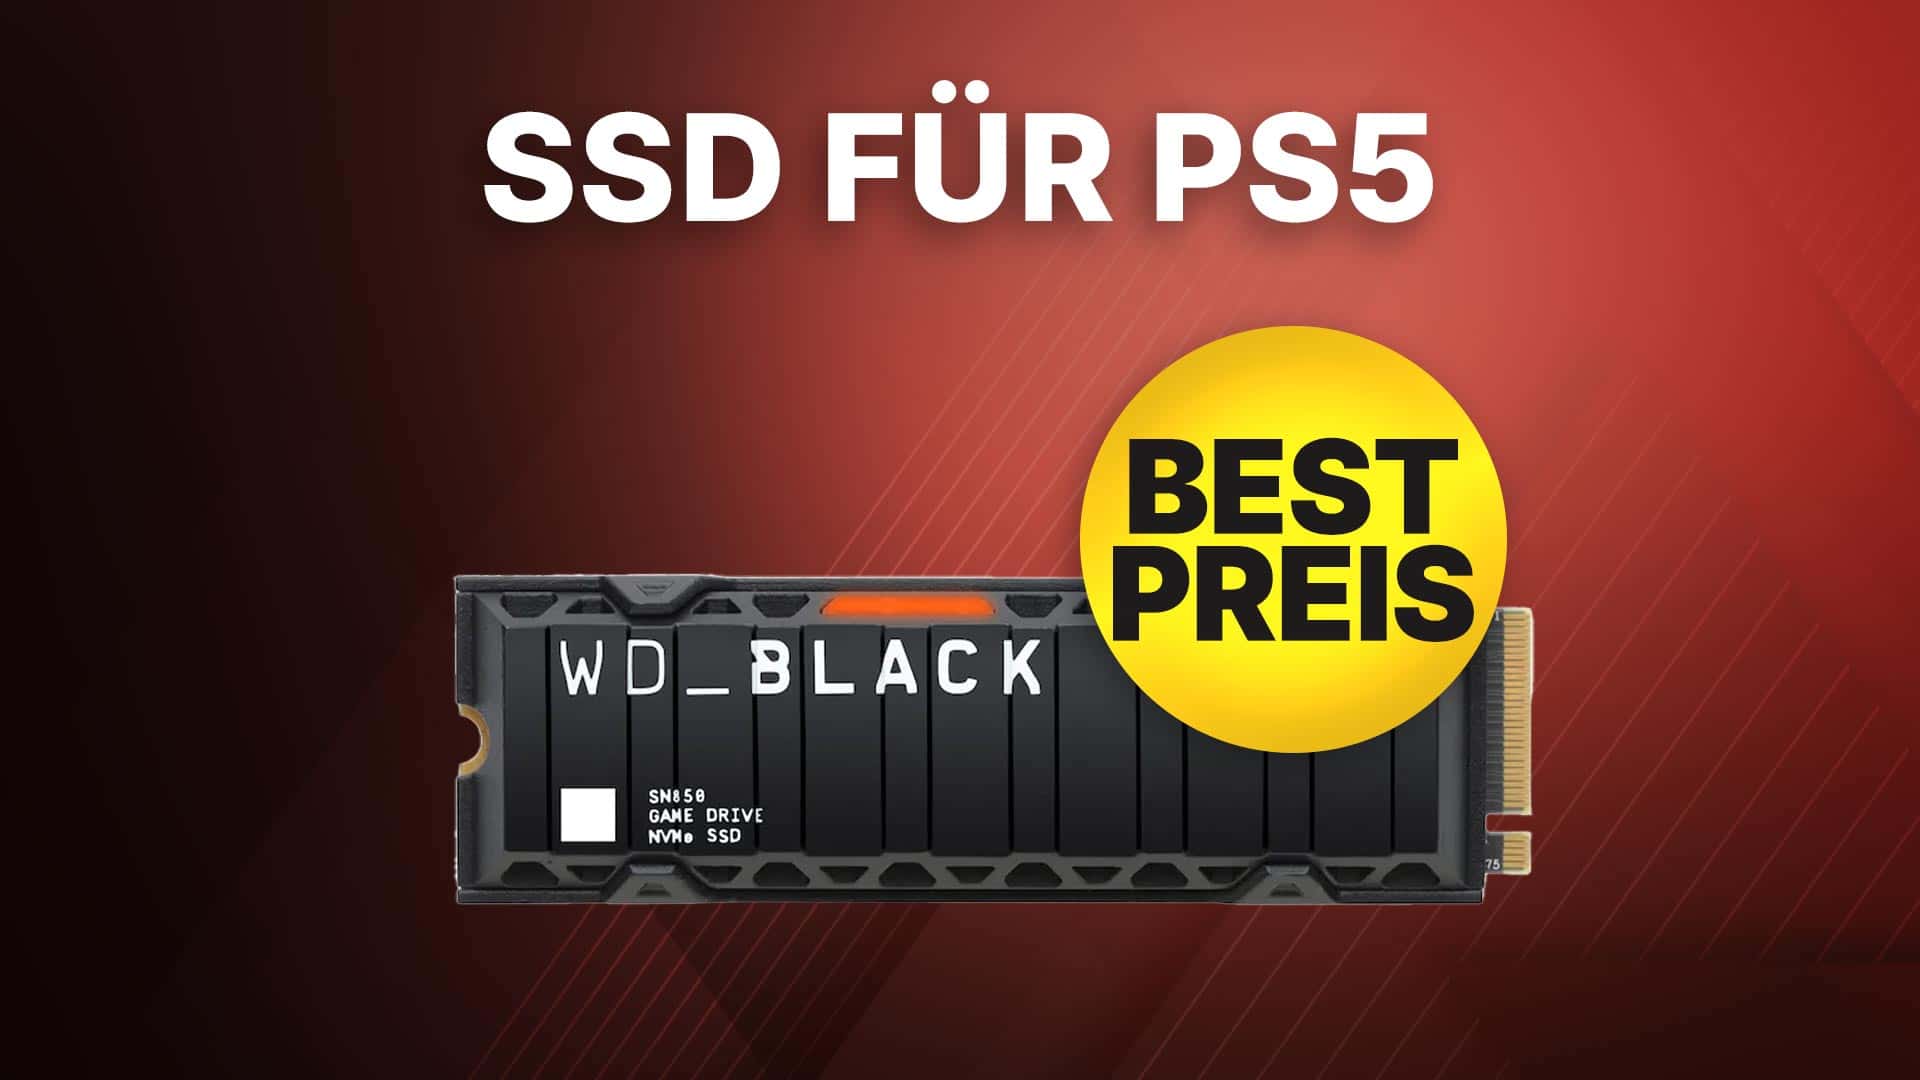 The best SSD for the PS5 is now available at Cyberport at the lowest price